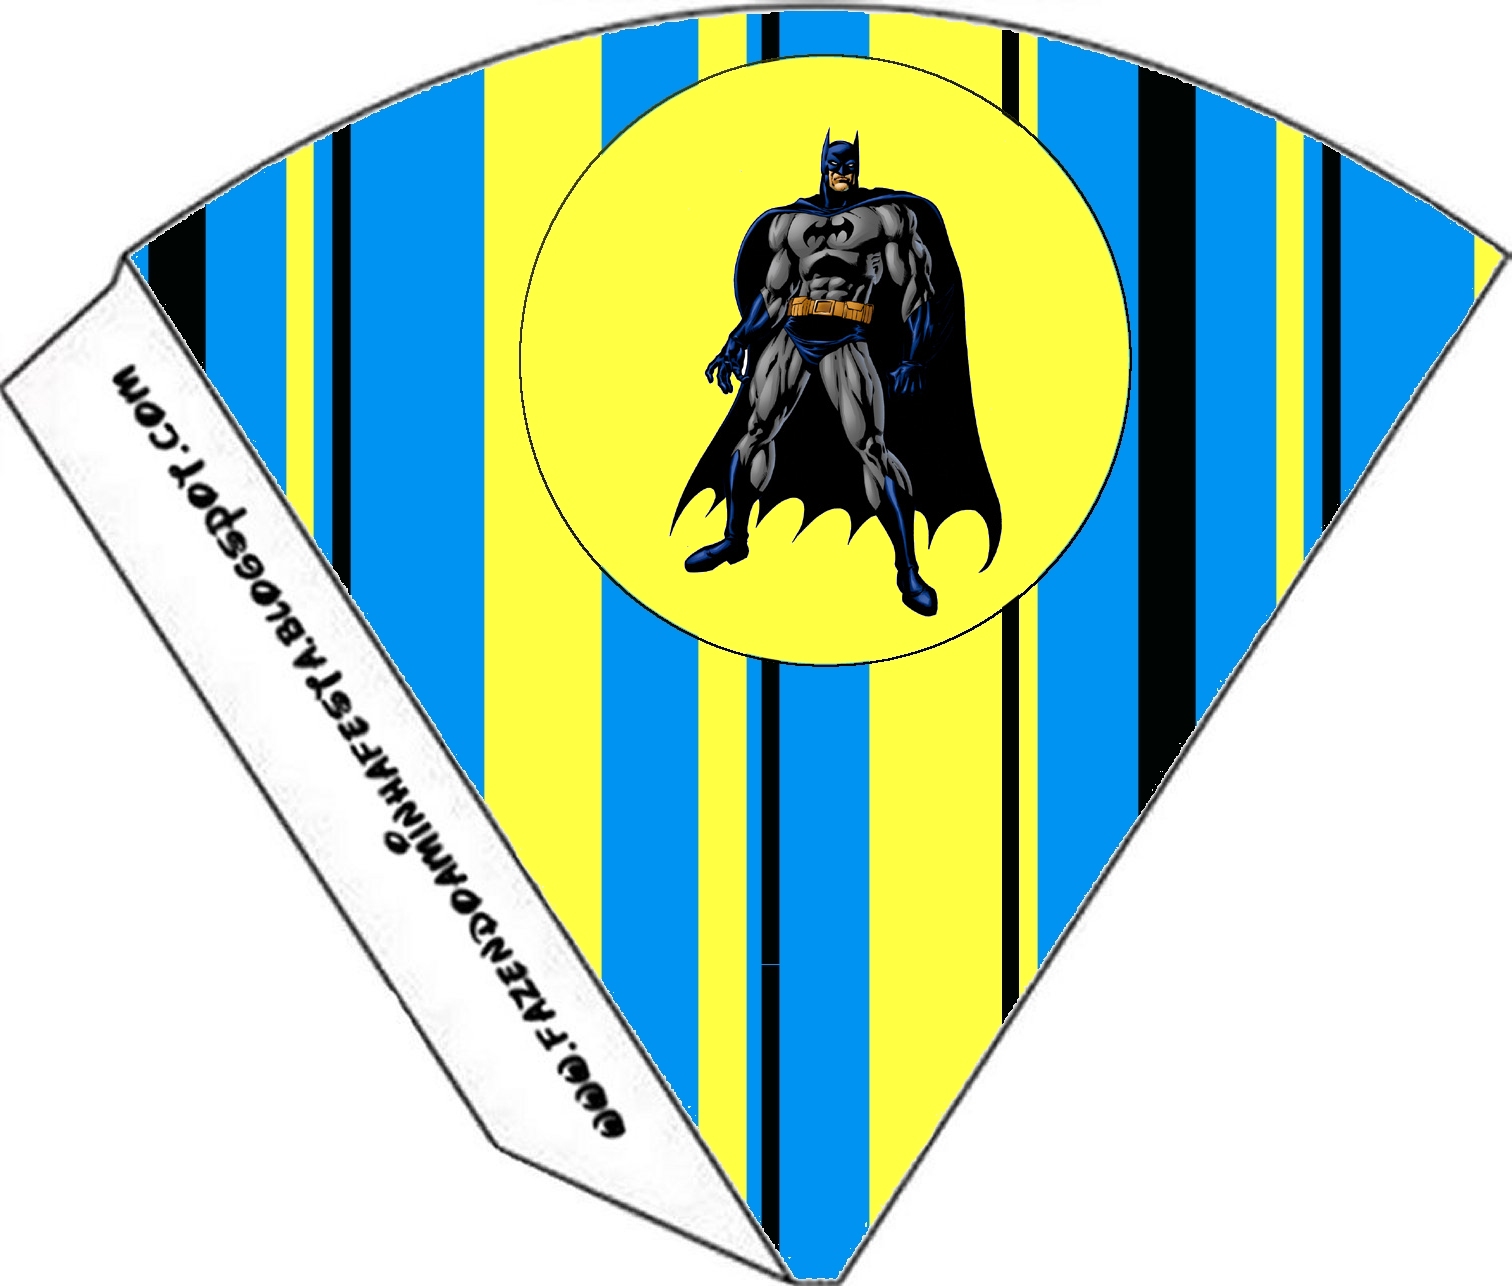 Batman Free Party Printables. - Oh My Fiesta! in english